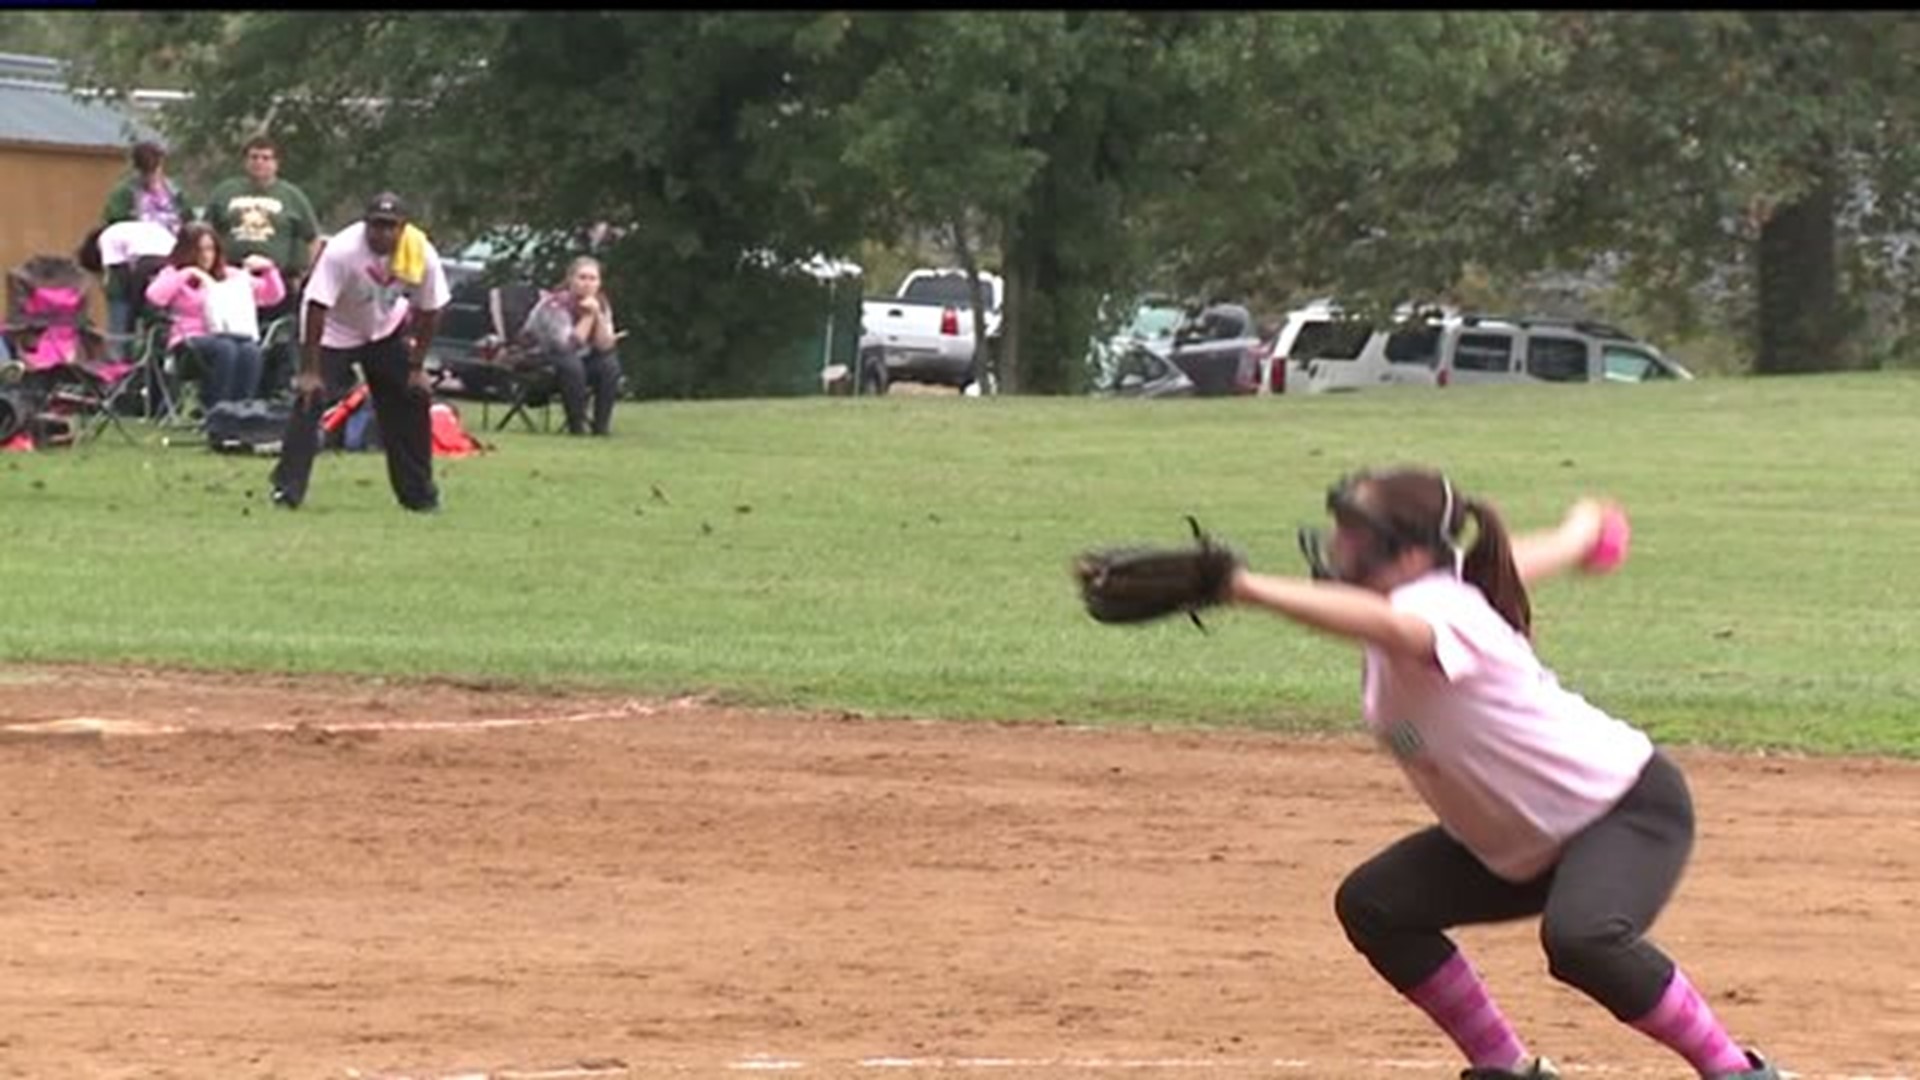 Teams gather for fast pitch softball with a purpose